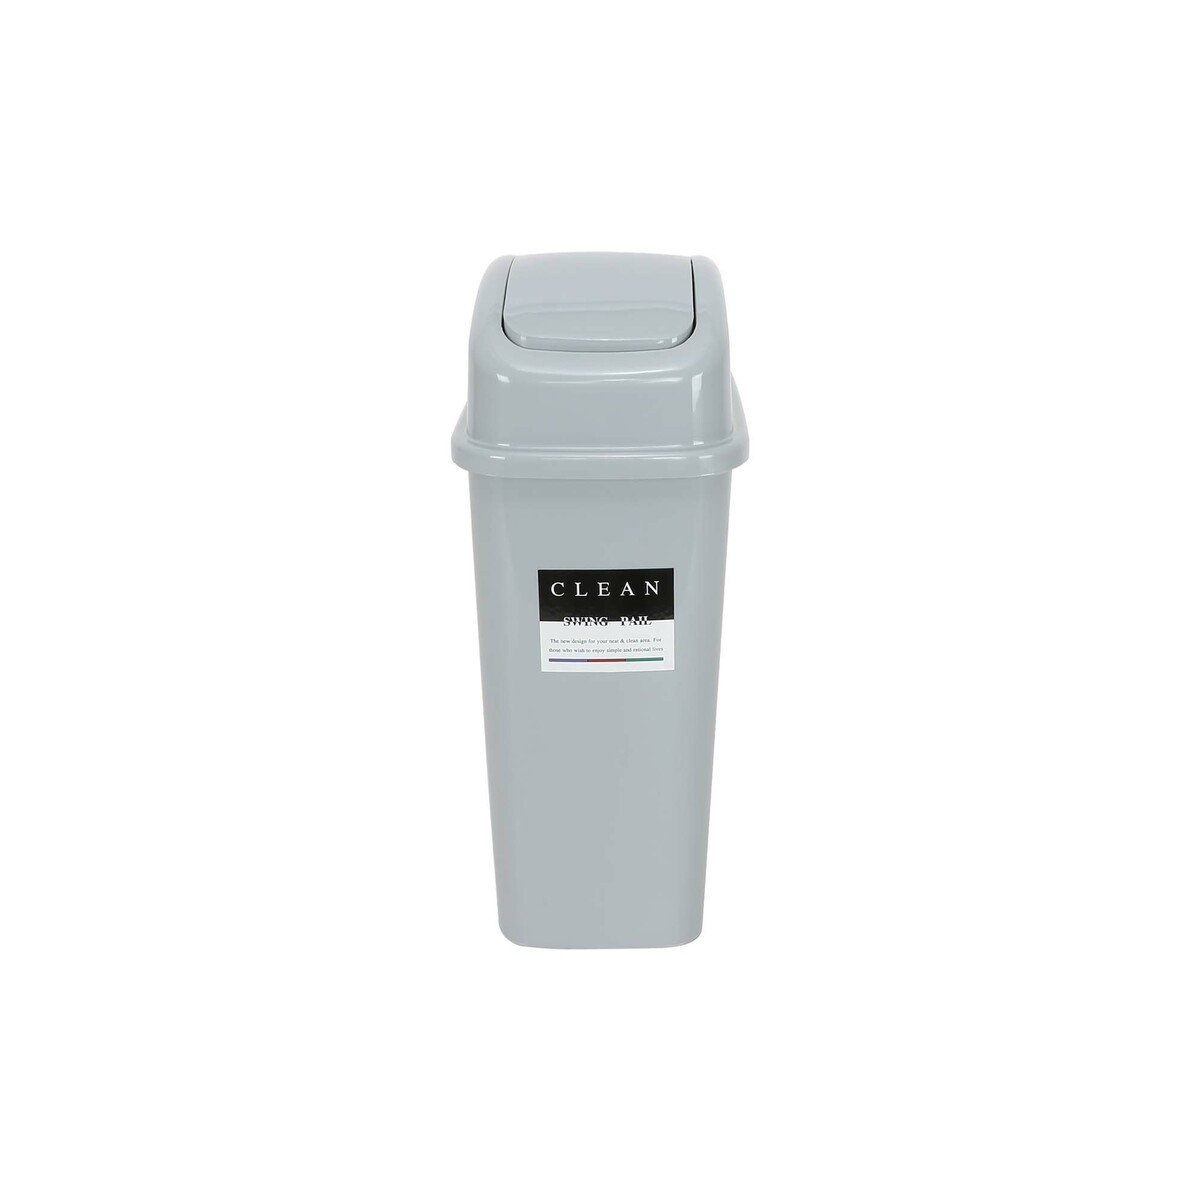 Soon Thorn Rectangle Swing Bin 10Ltr 664 Assorted Colors